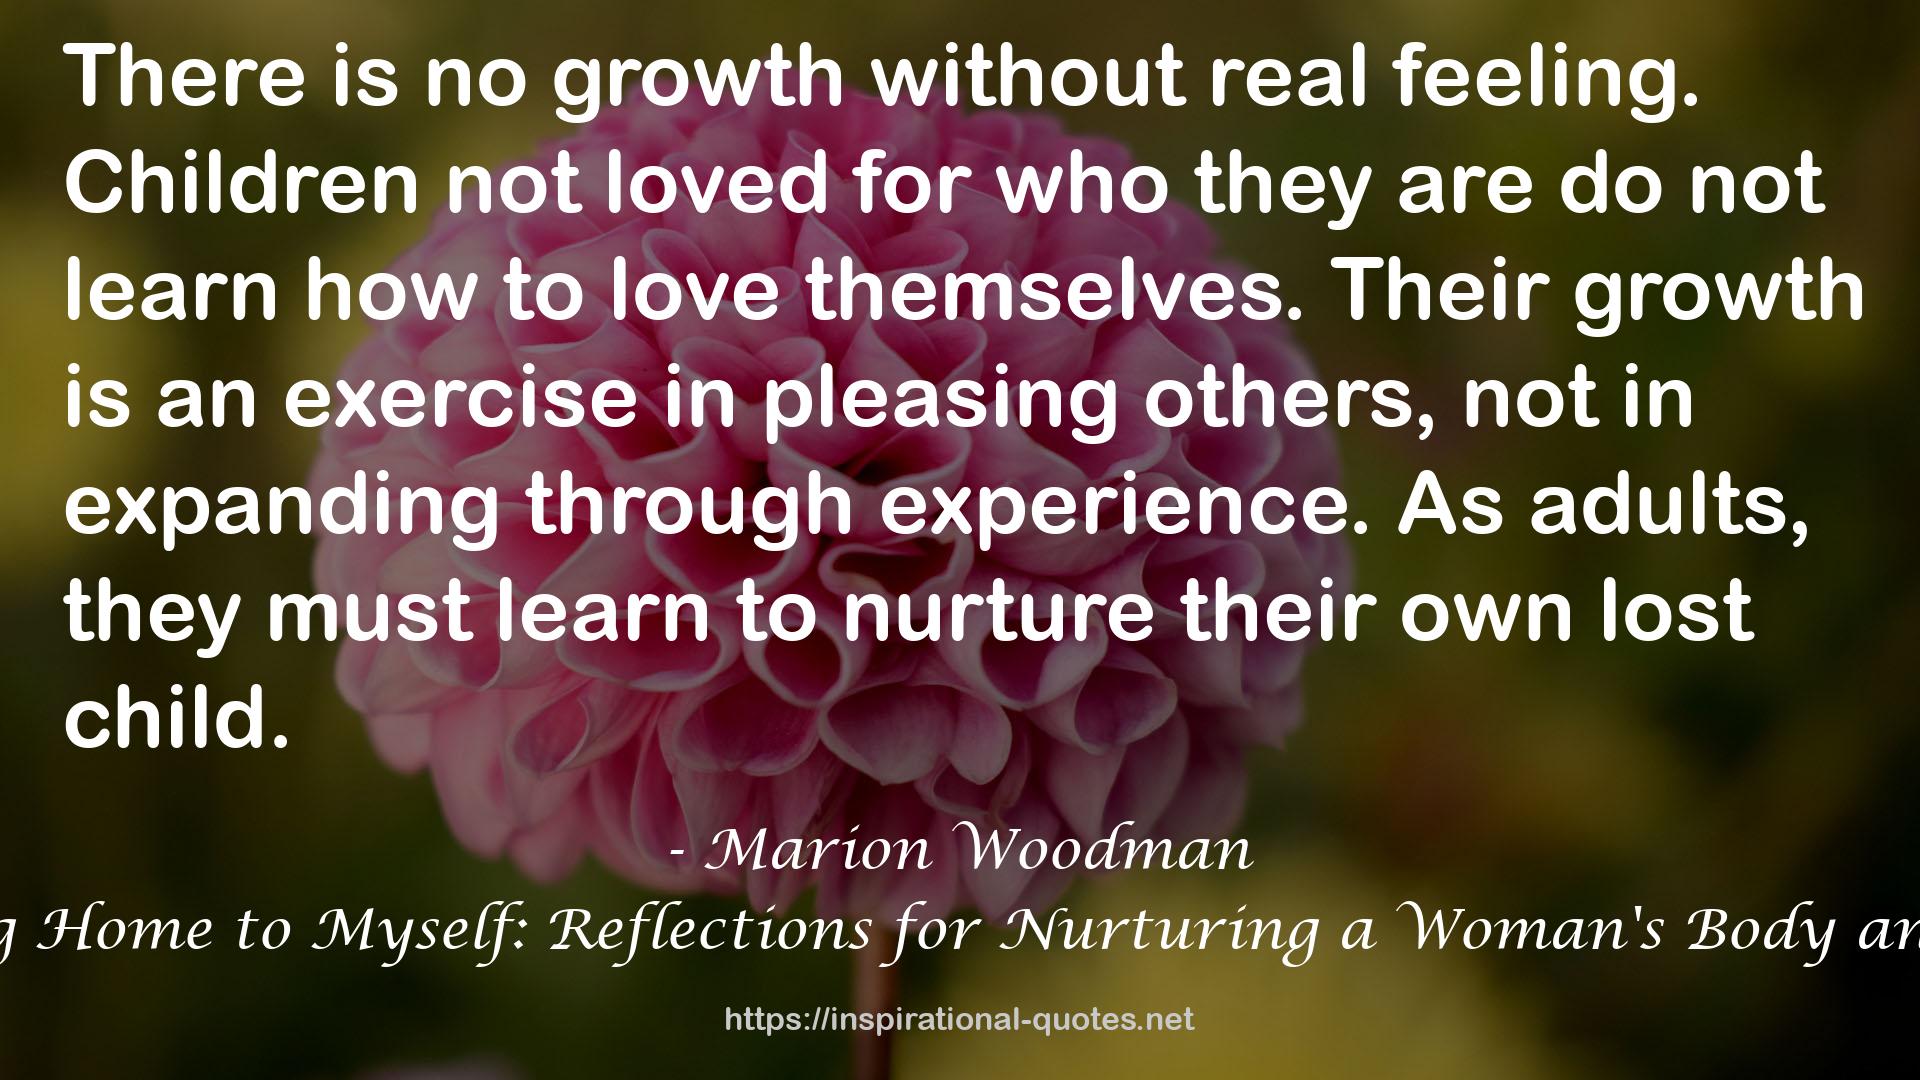 Coming Home to Myself: Reflections for Nurturing a Woman's Body and Soul QUOTES